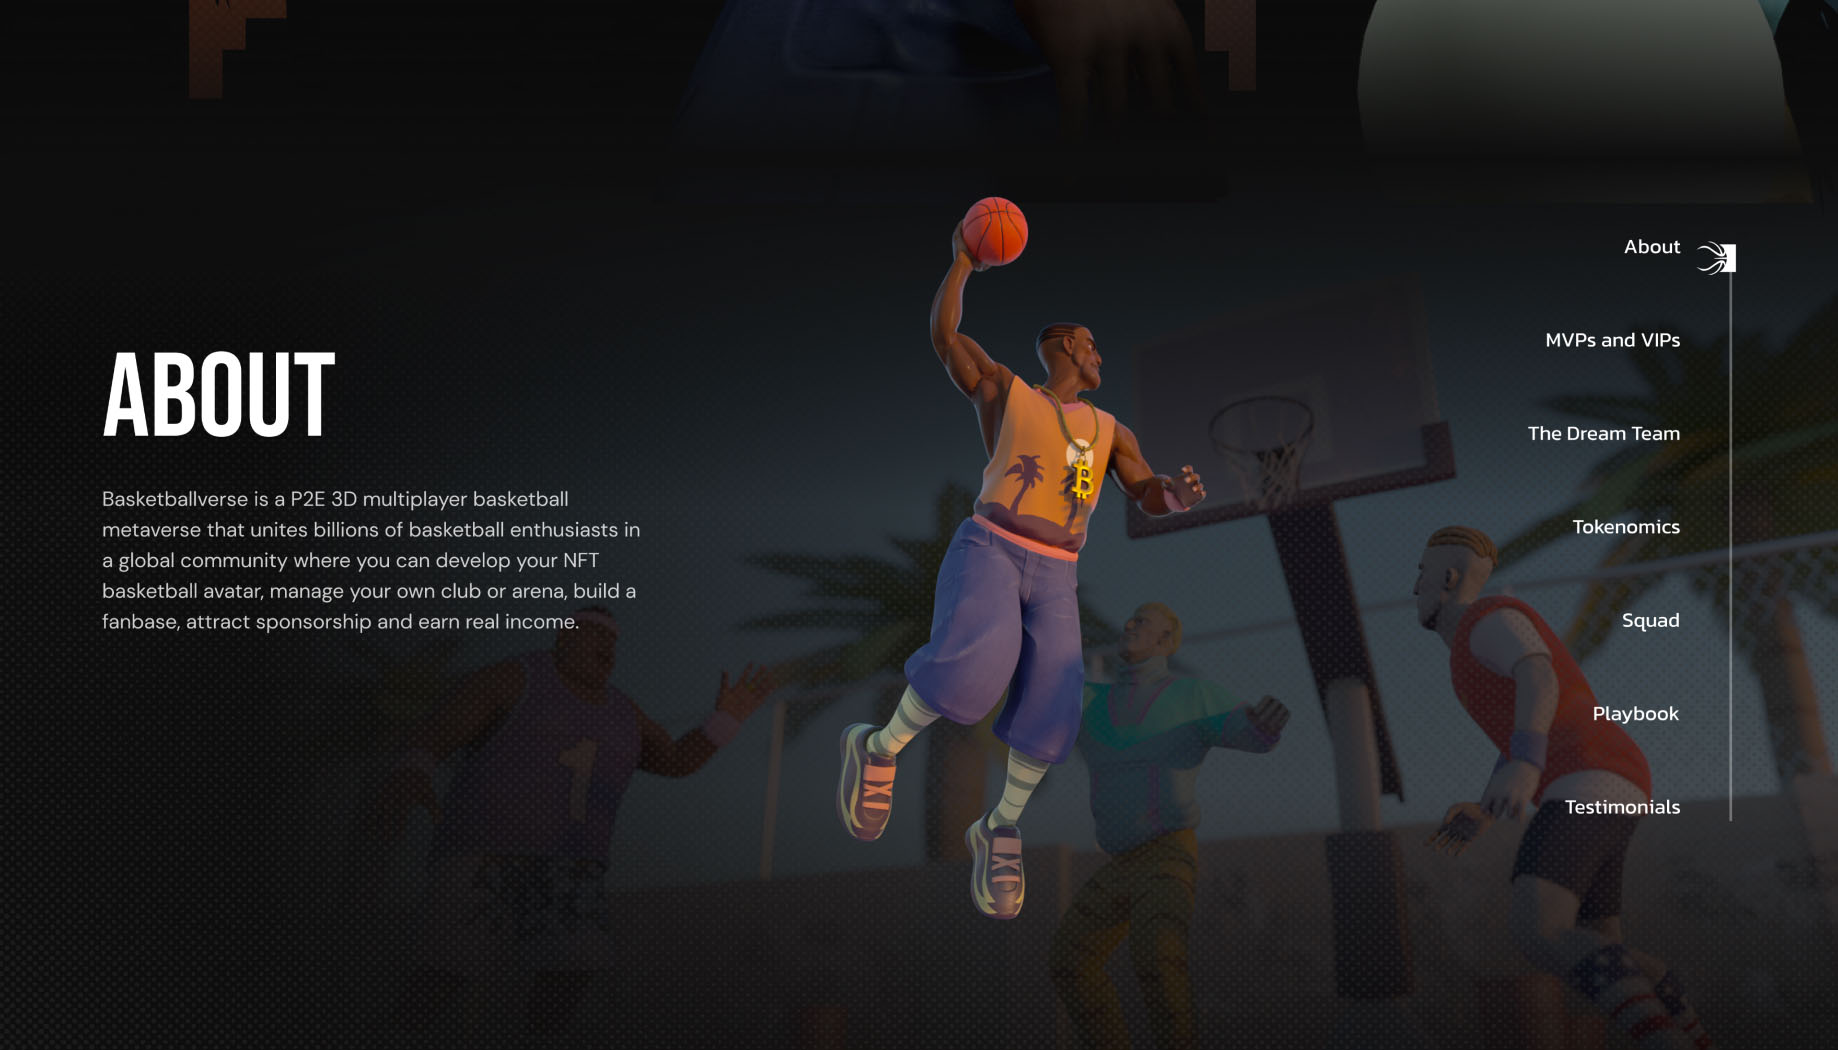 NFT-Trailblazing NBA Looks to Lure Basketball Fans Into the Metaverse